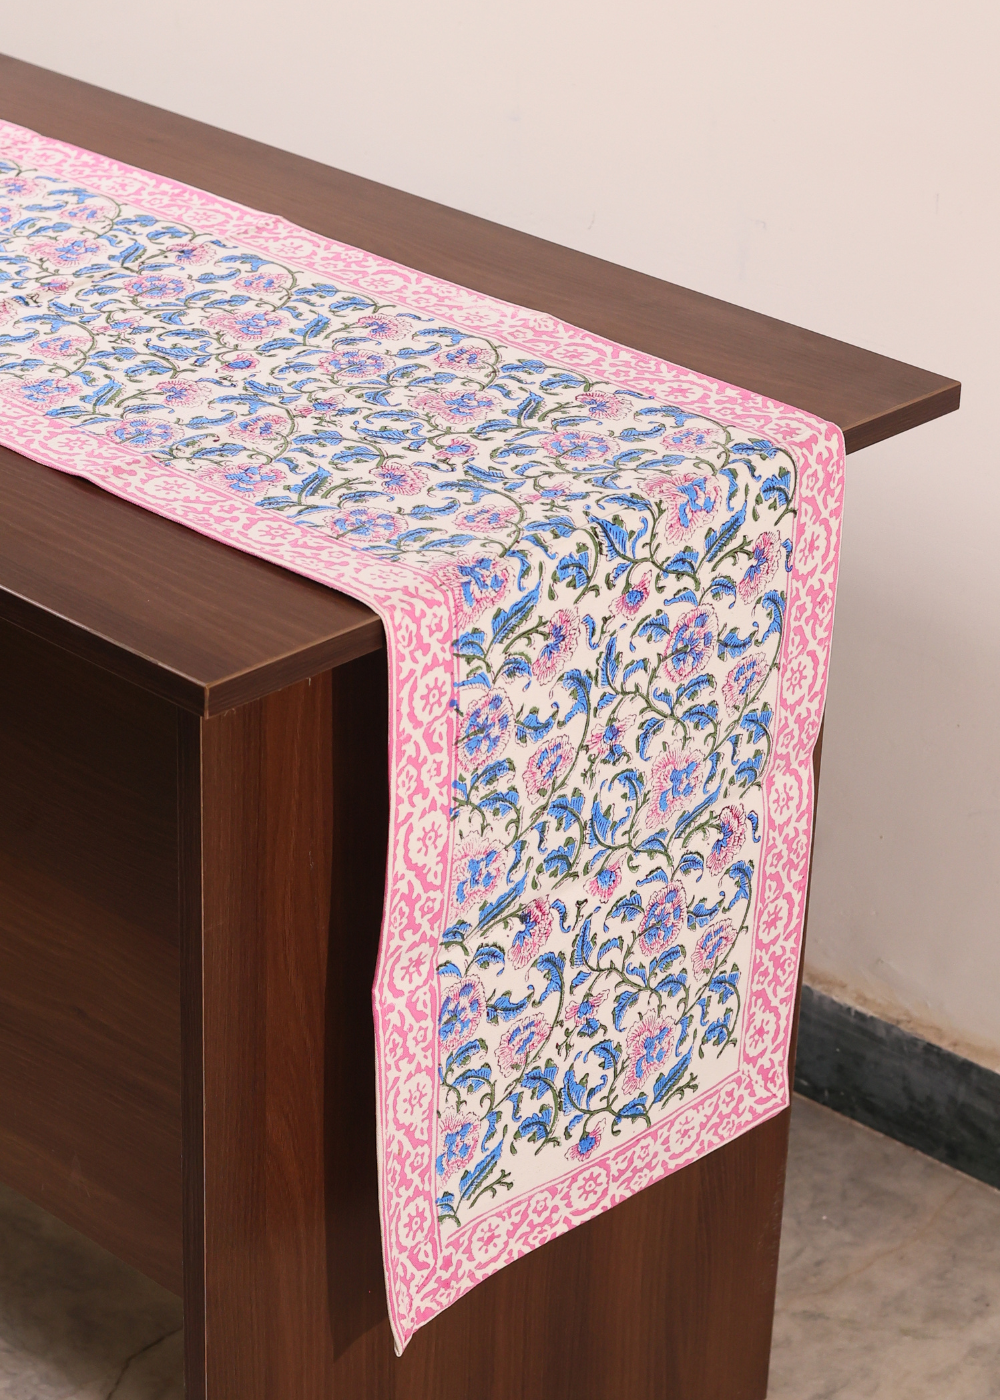 Blue and pink floral table runner